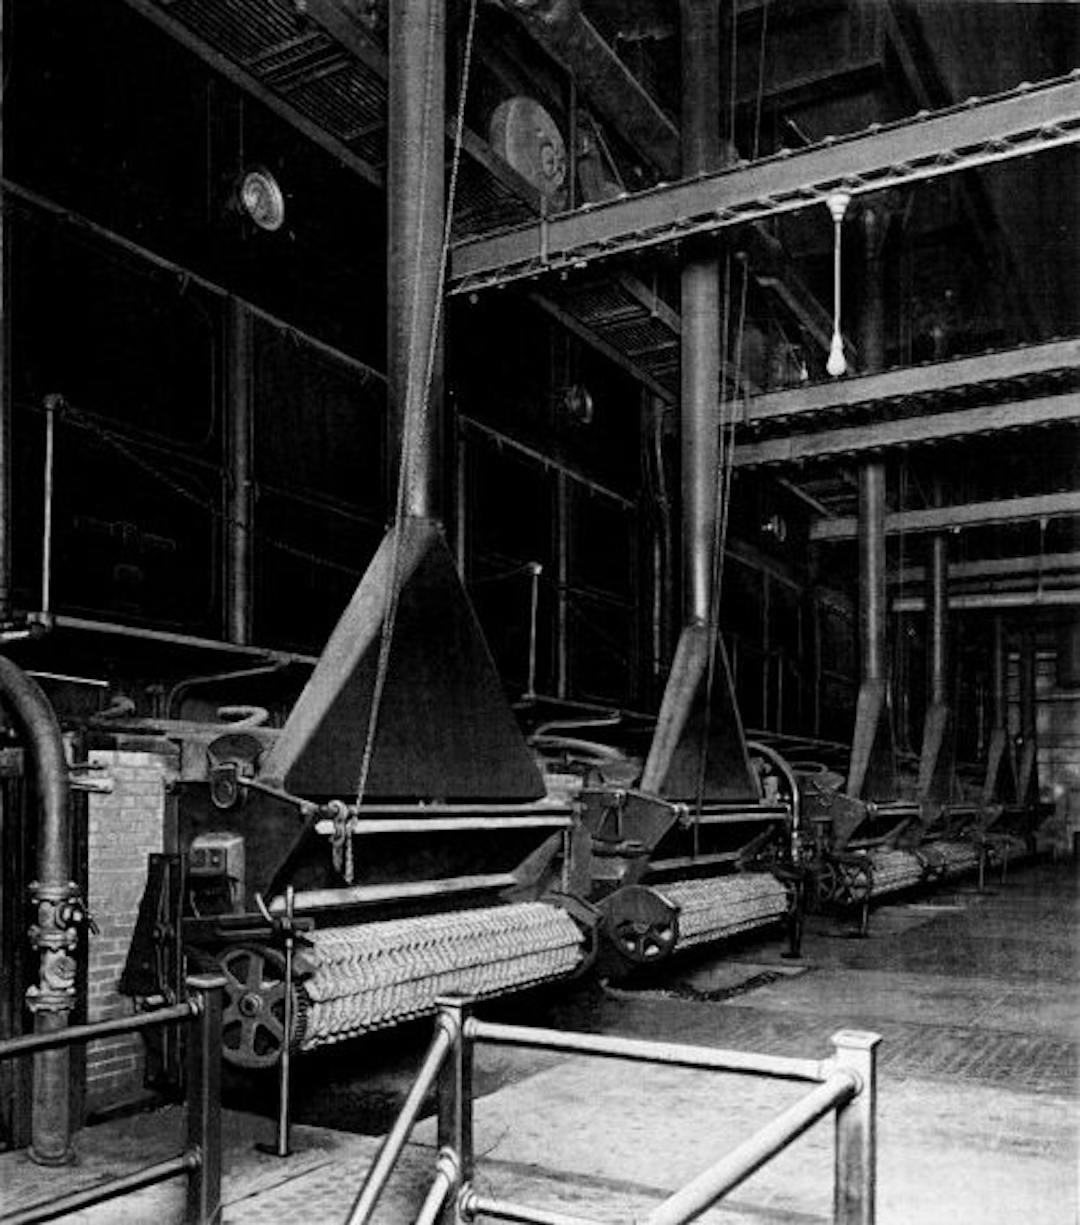 3000 Horse-power Installation of Babcock & Wilcox Boilers in the Main Power Plant, Chicago & Northwestern Ry. Depot, Chicago, Ill.